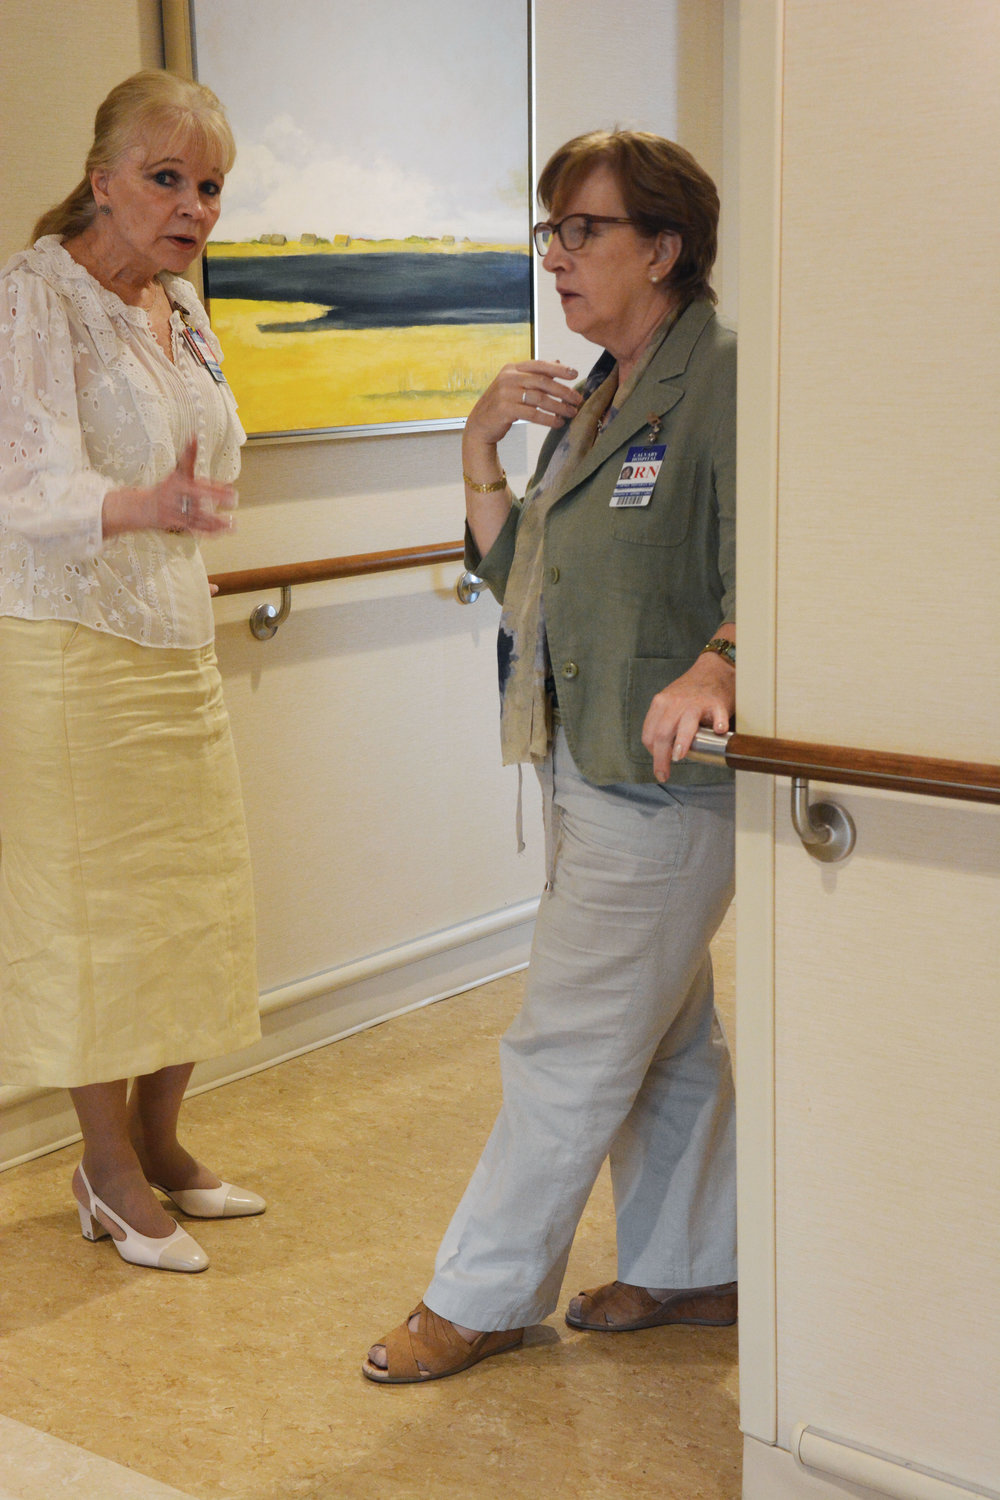 Dr. Gail Chrzanowski, M.D., medical director of The Dawn Greene Hospice, left, and Carmel Monahan, R.N., director of patient services of Calvary@Home, converse at The Dawn Greene Hospice at Mary Manning Walsh Home in Manhattan June 5.